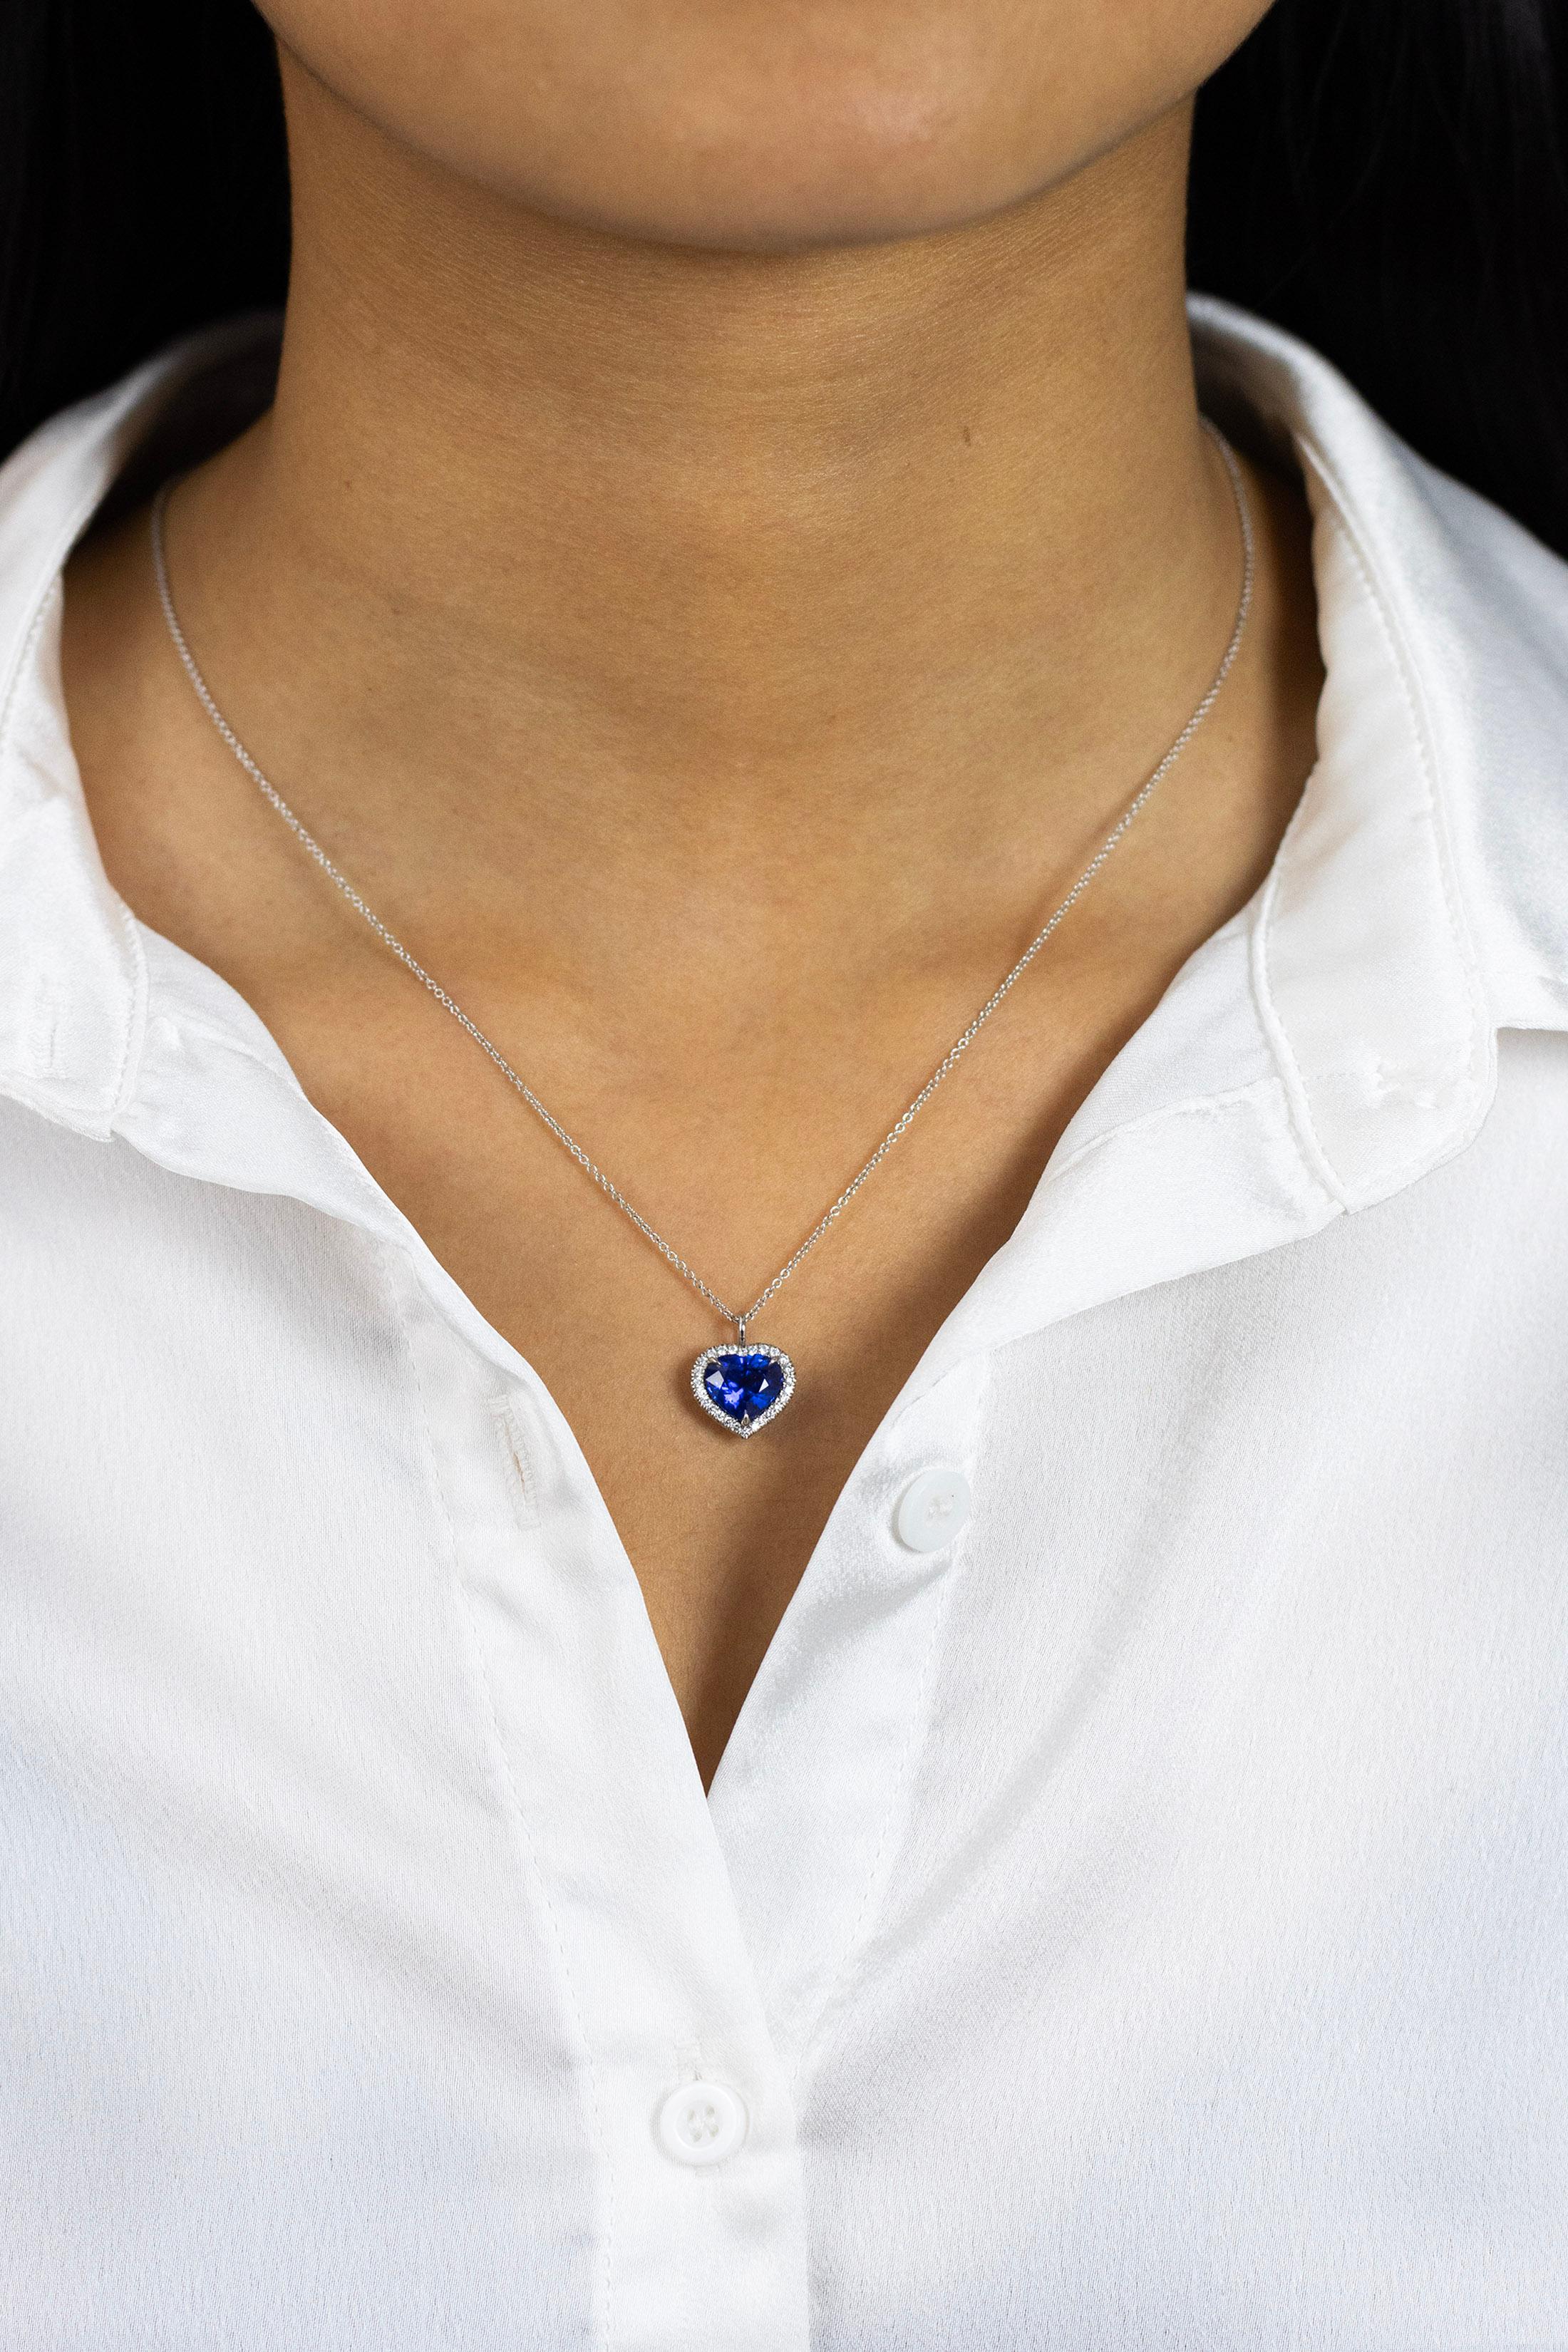 Contemporary GIA Certified 2.58 Carat Heart Shape Blue Sapphire with Diamond Pendant Necklace For Sale